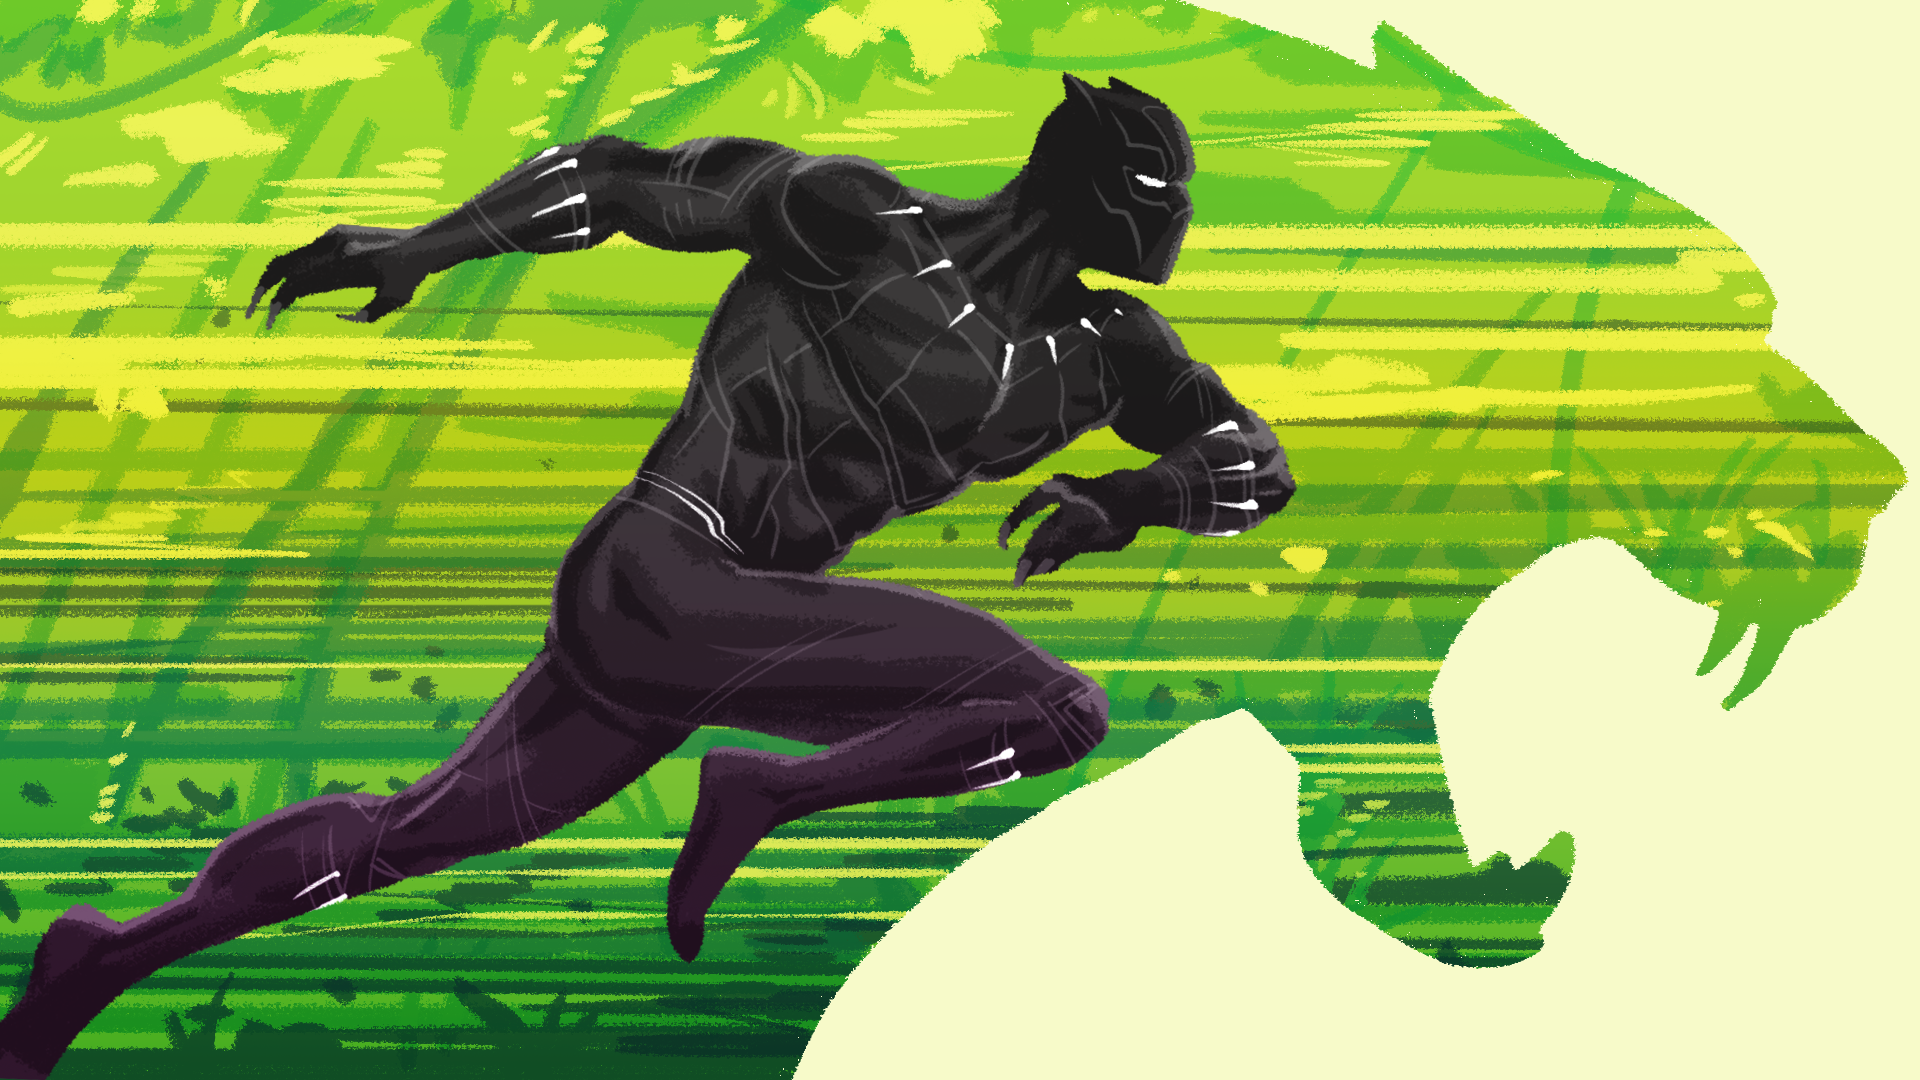 Black-Panther-Illo-1.png